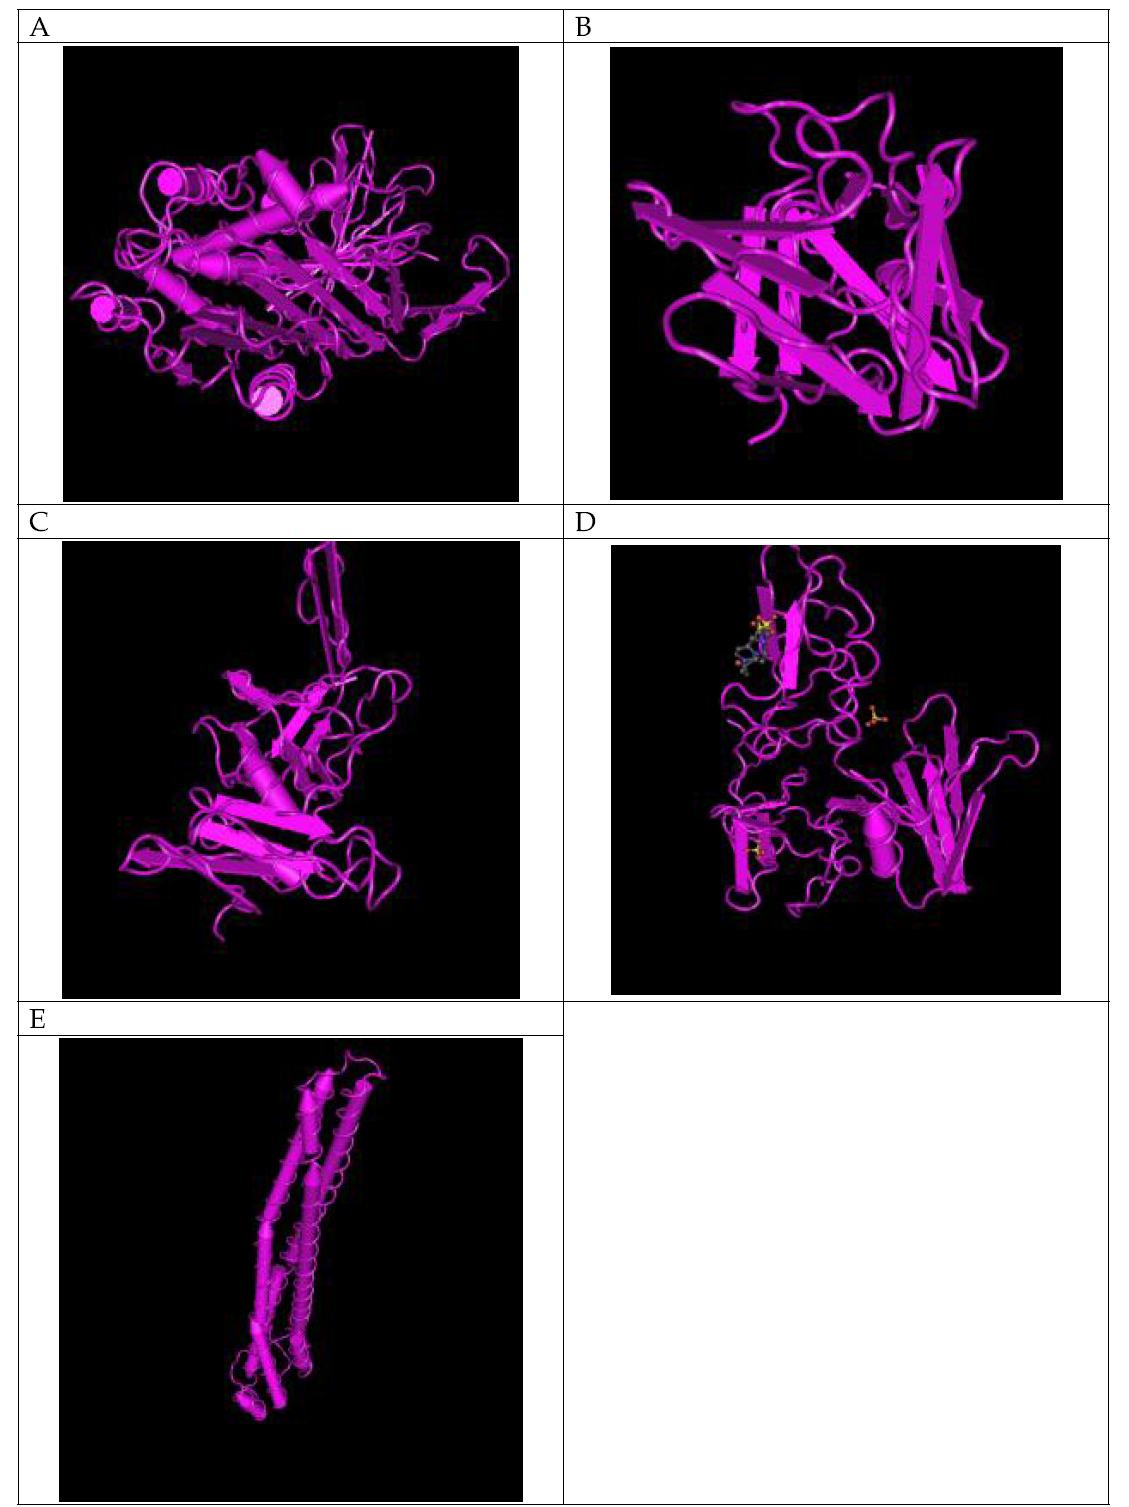 3D images of biomarker proteins by RCSB PDB